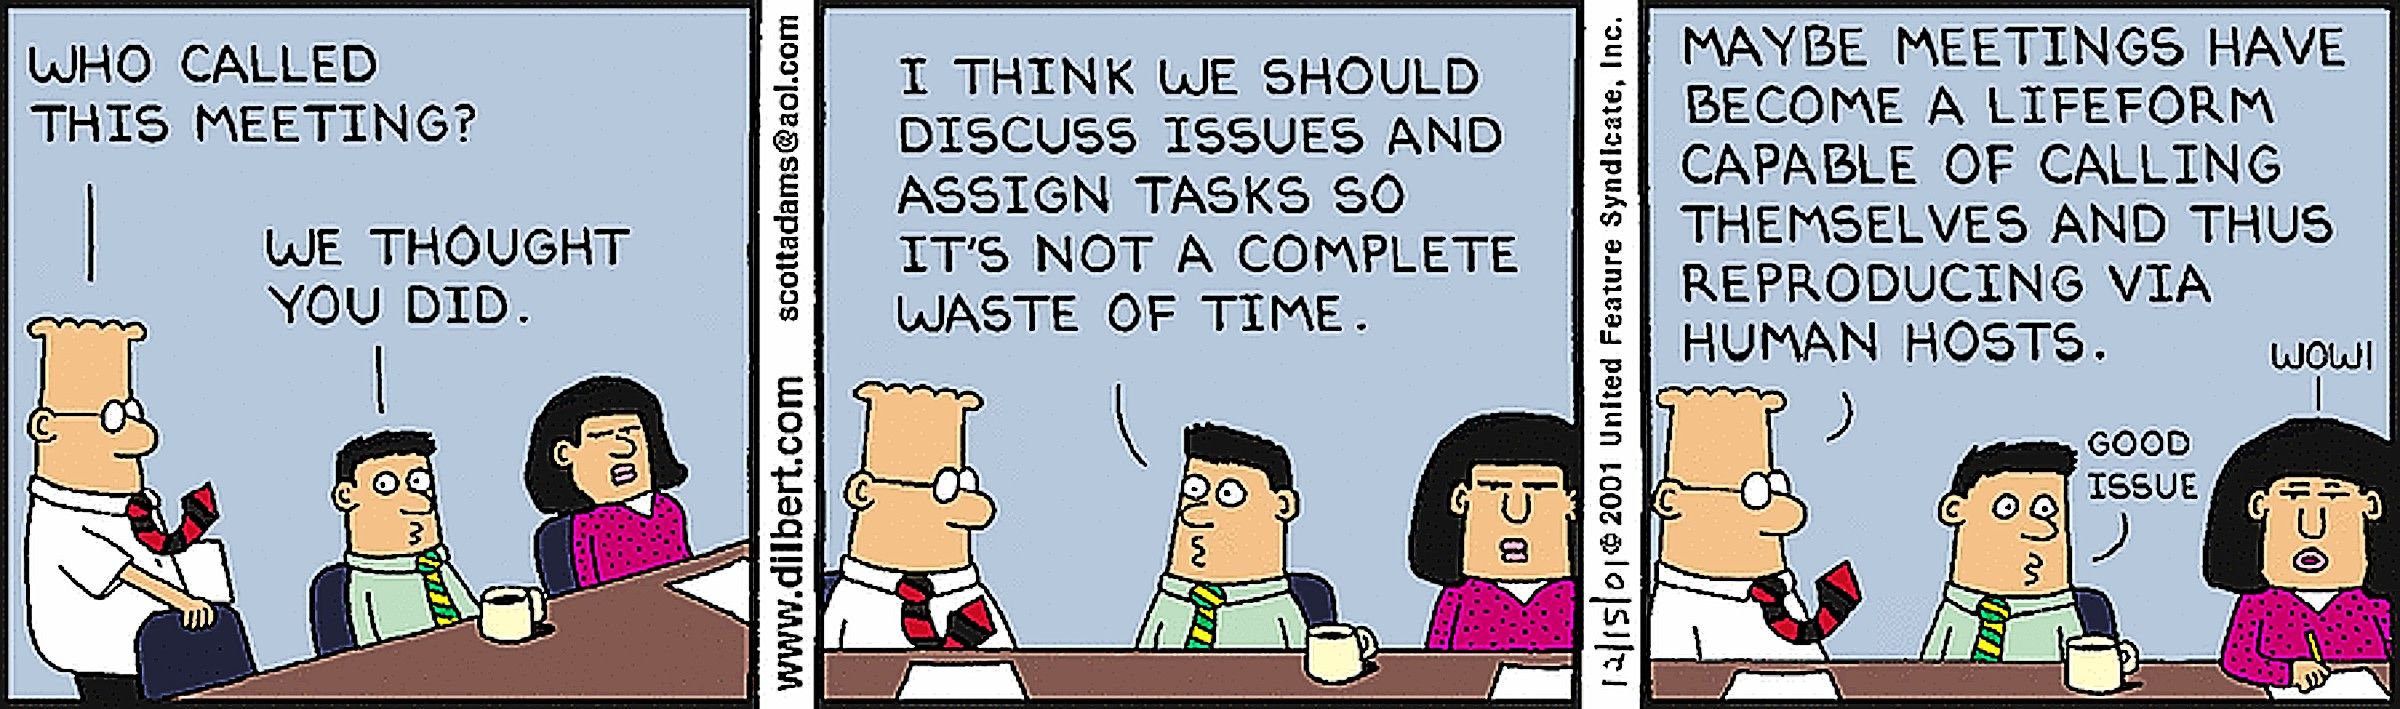 Dilbert, "maybe meetings have become a life form of their own."